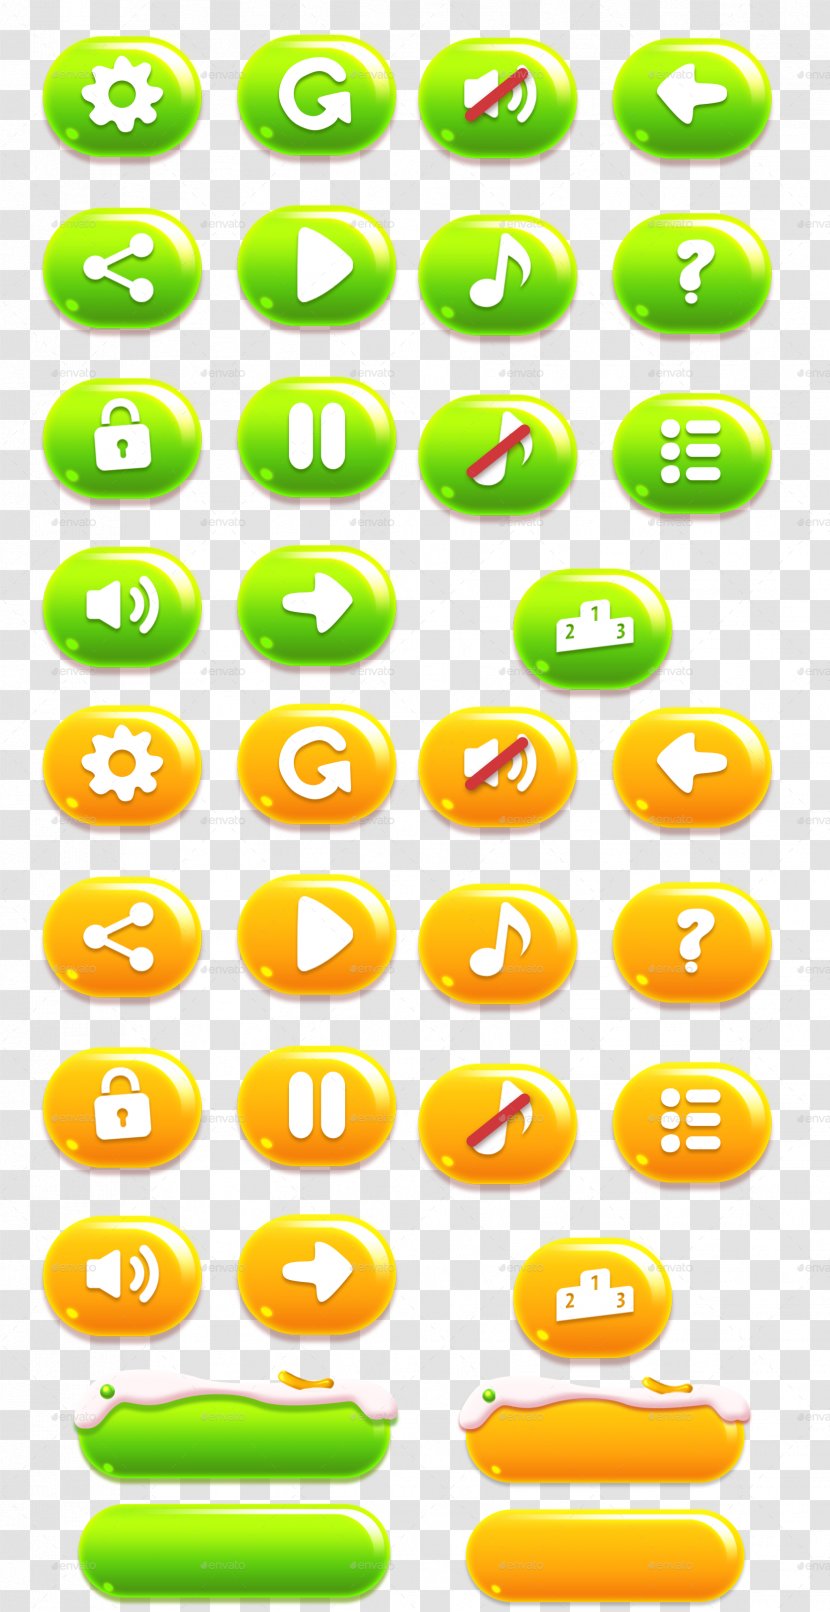 Button Graphical User Interface - Text Transparent PNG